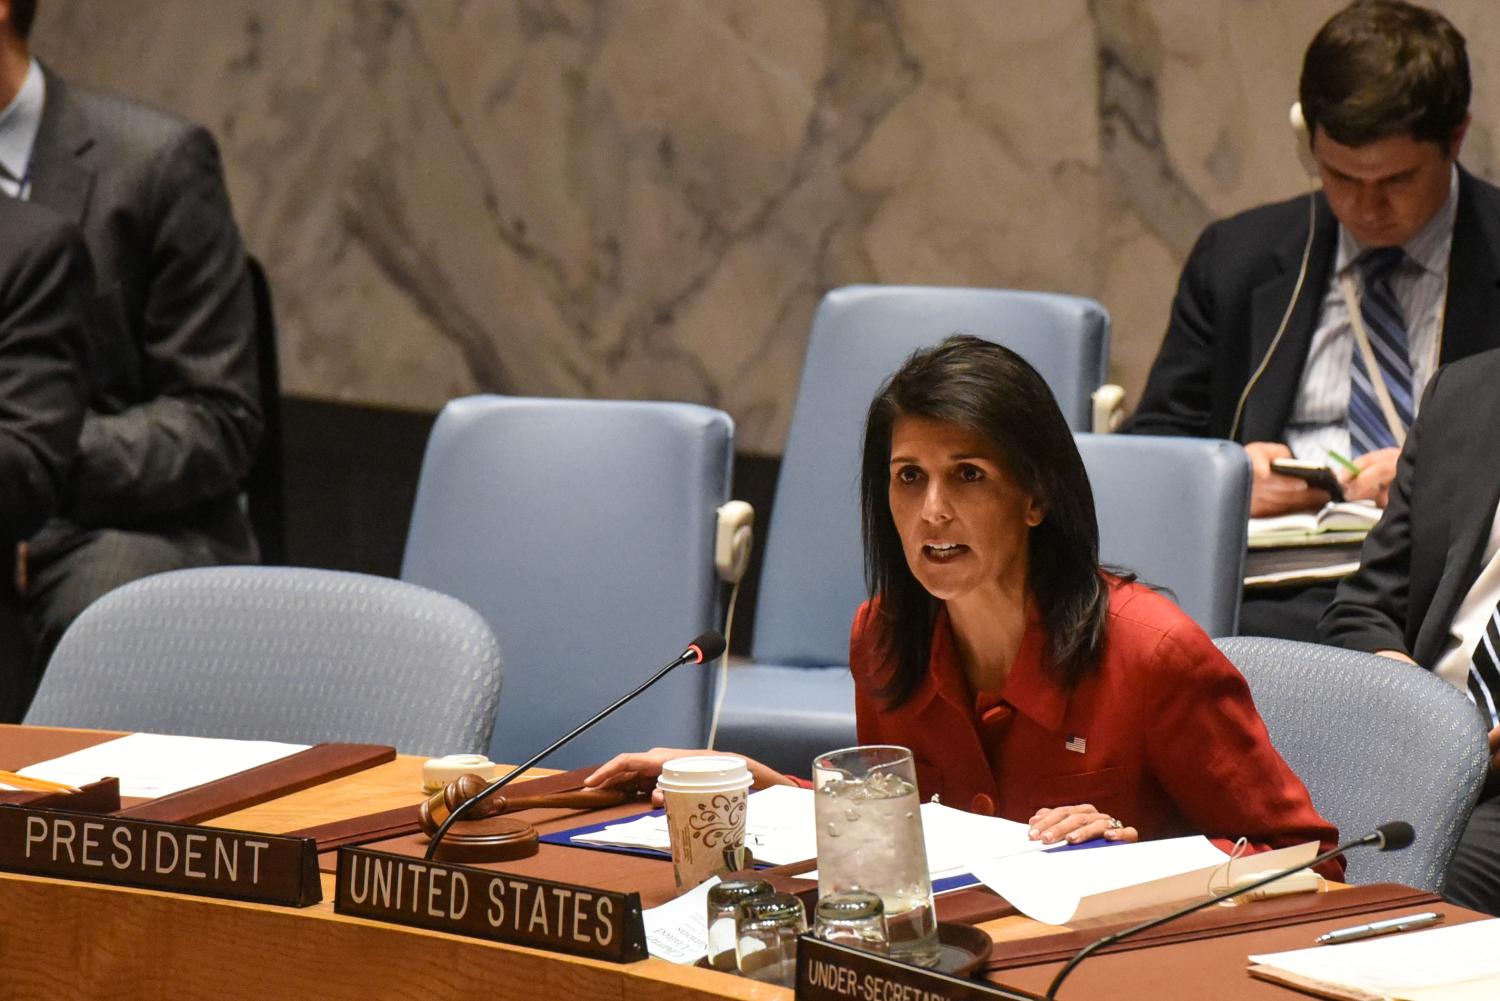 United States Ambassador to the United Nations Nikki Haley delivers introductory remarks during the Security Council meeting on the situation in Syria at the United Nations Headquarters, in New York